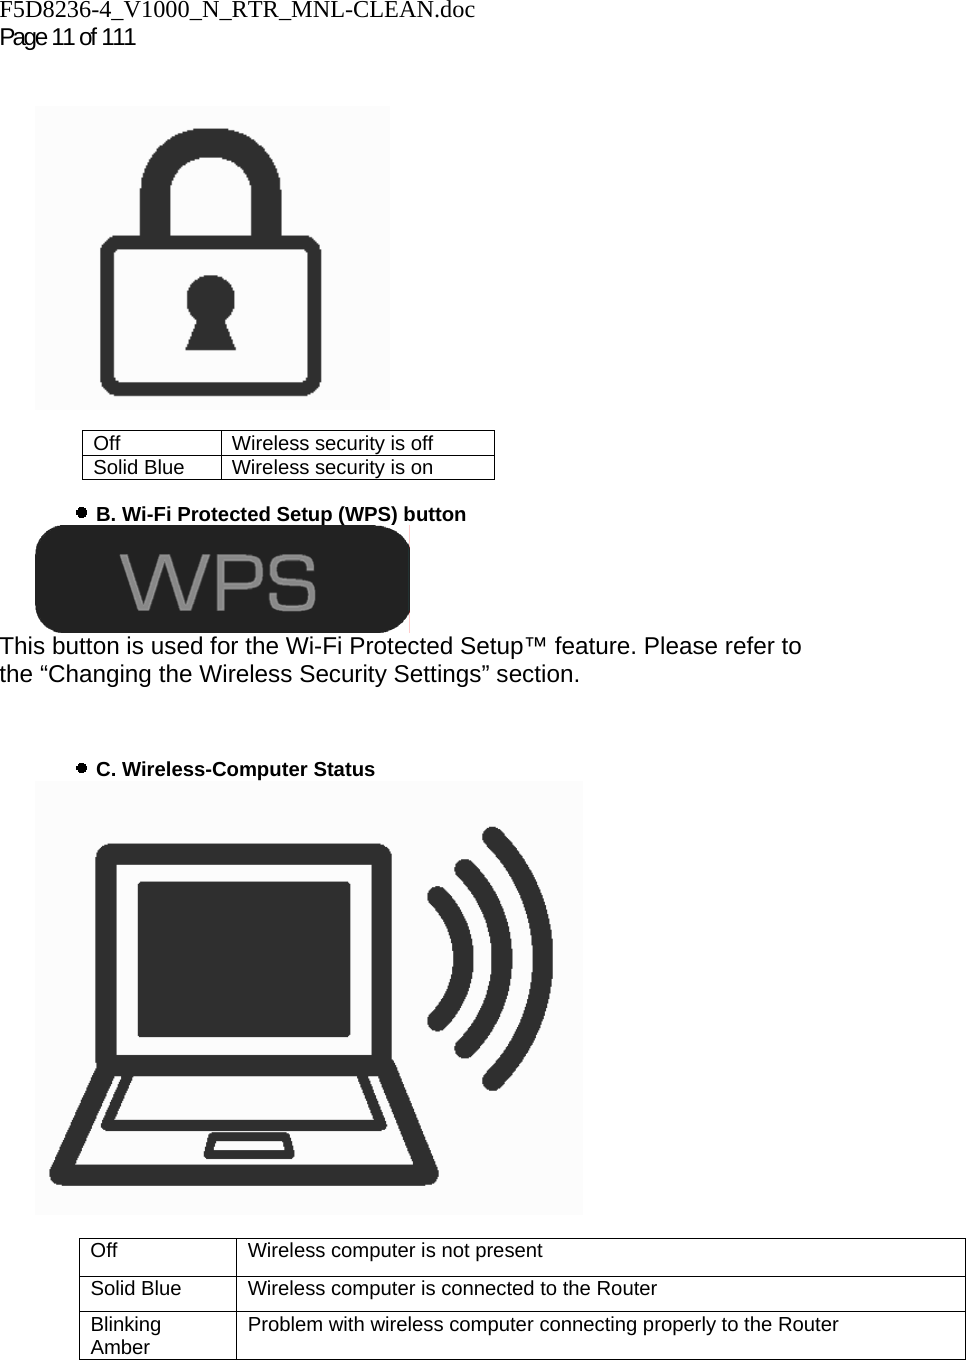 F5D8236-4_V1000_N_RTR_MNL-CLEAN.doc  Page 11 of 111           B. Wi-Fi Protected Setup (WPS) button  This button is used for the Wi-Fi Protected Setup™ feature. Please refer to the “Changing the Wireless Security Settings” section.      C. Wireless-Computer Status    Off  Wireless computer is not present Solid Blue  Wireless computer is connected to the Router Blinking Amber  Problem with wireless computer connecting properly to the Router  Off  Wireless security is off Solid Blue  Wireless security is on 